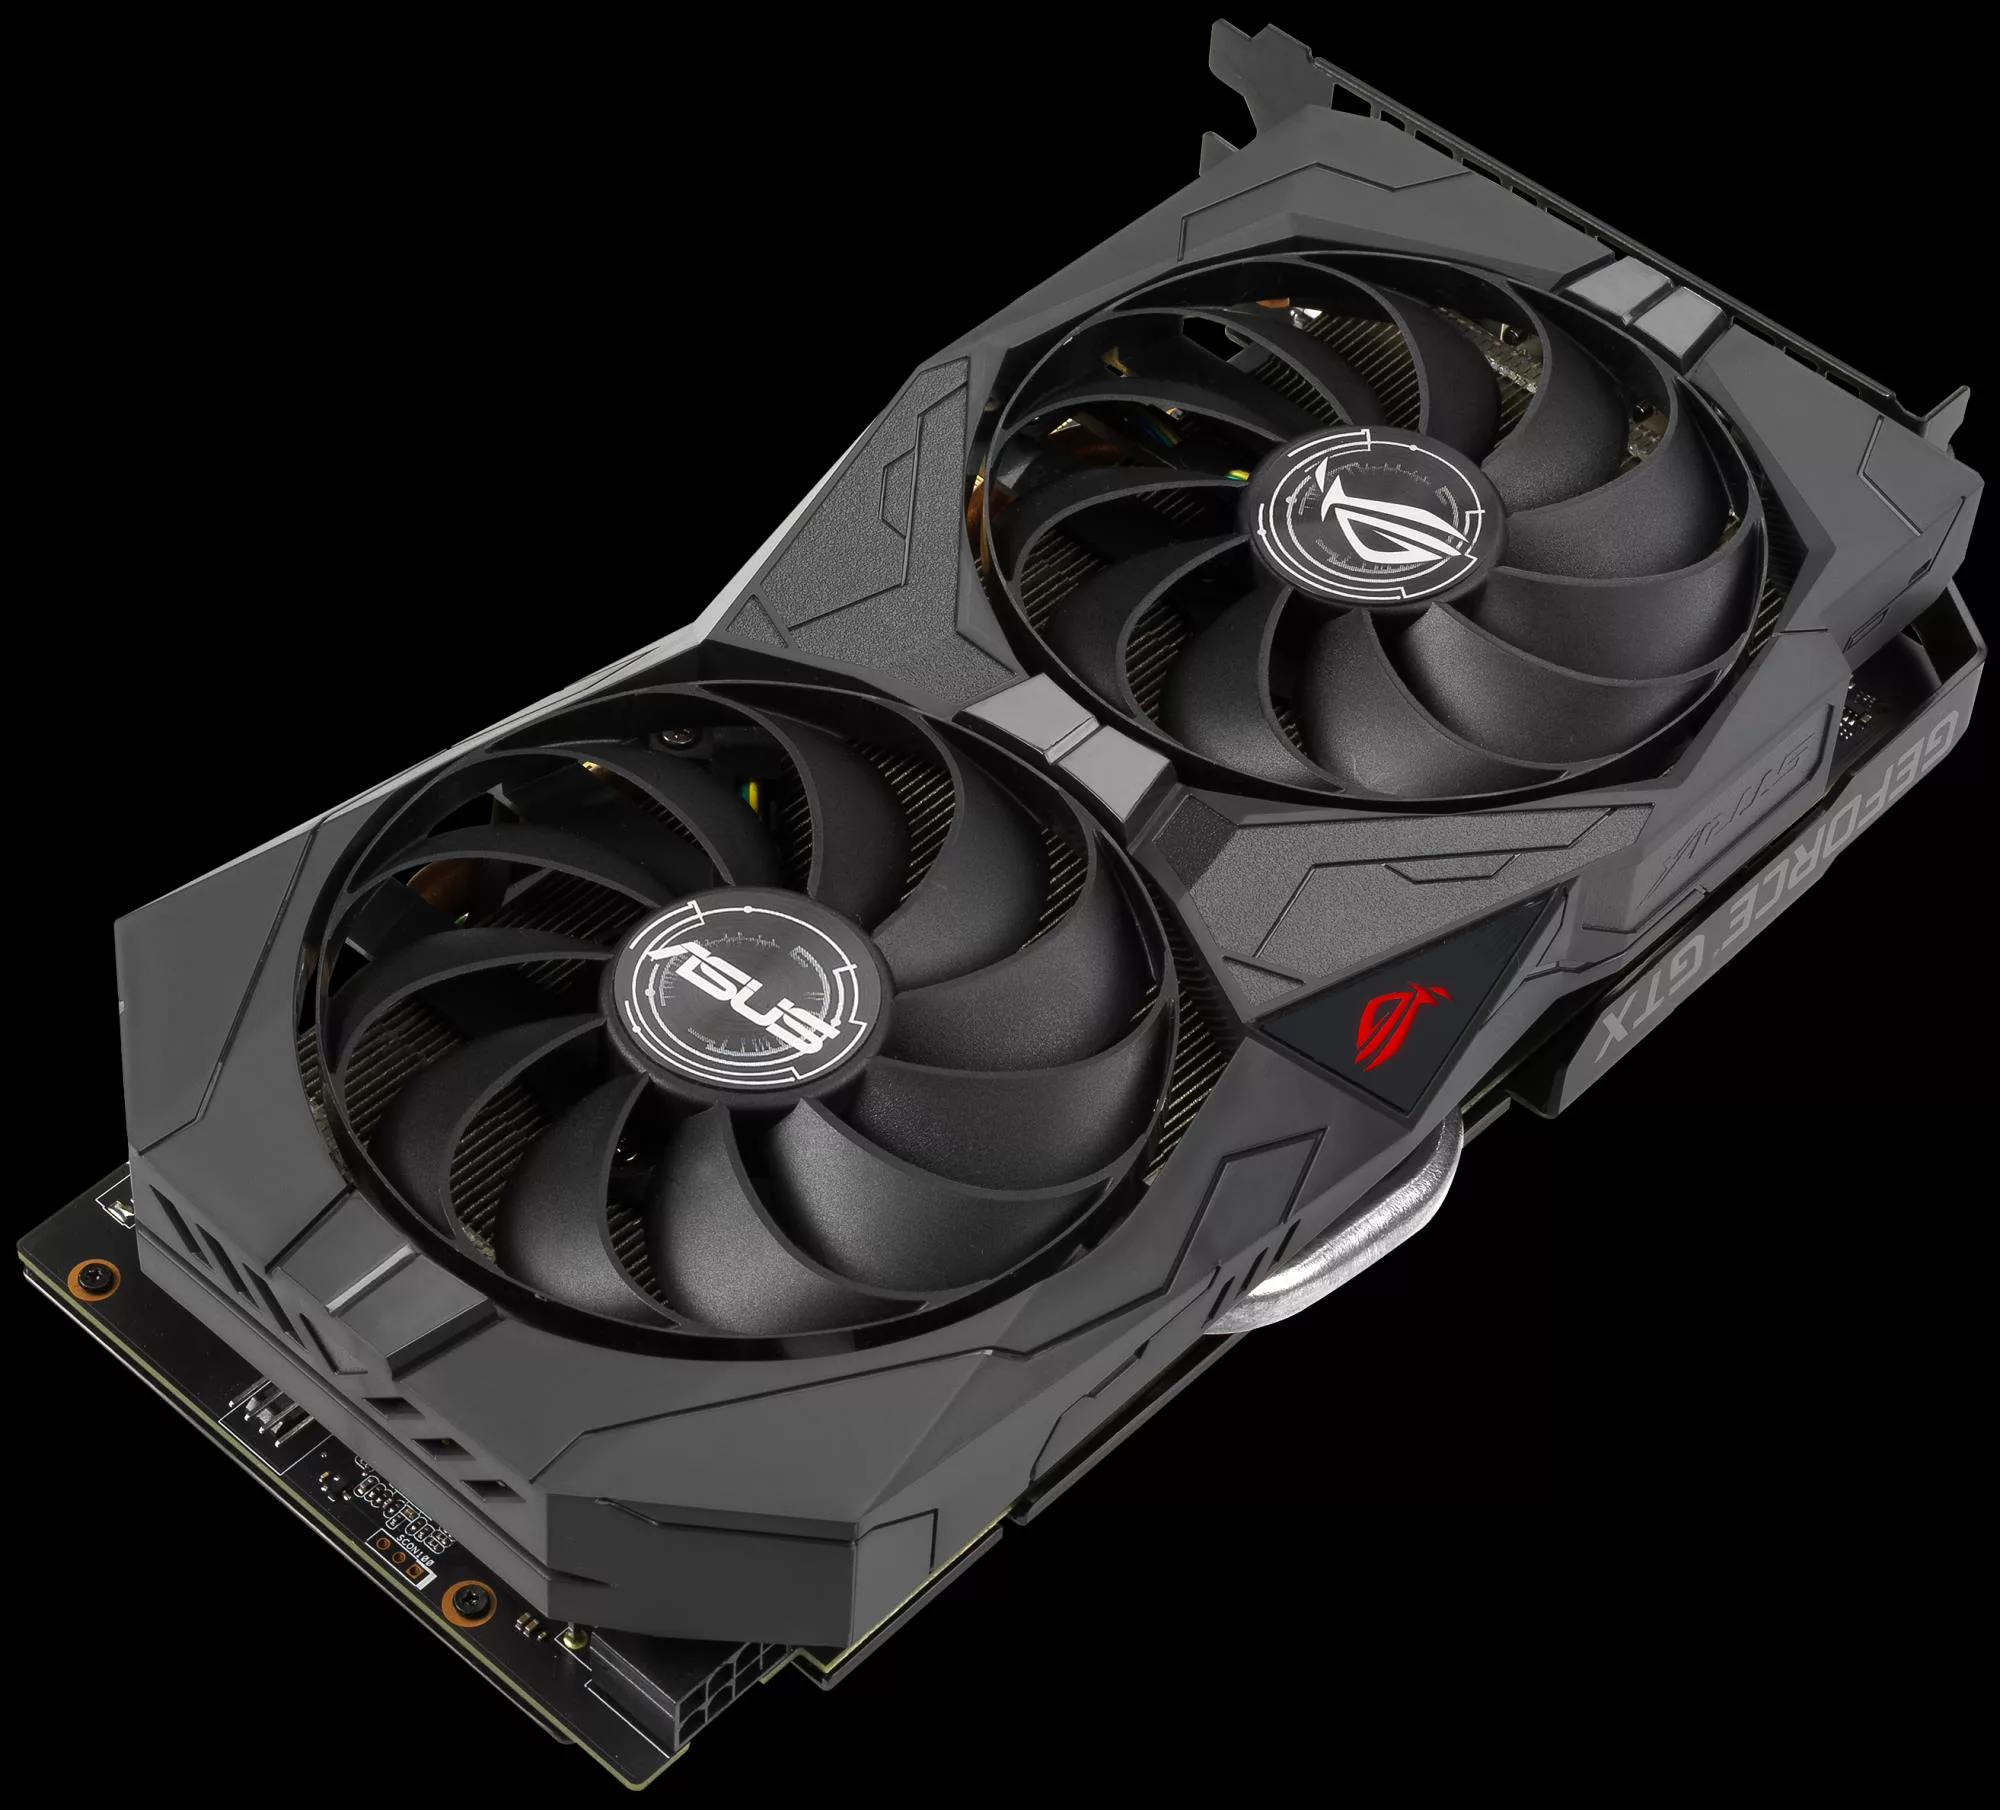 GeForce GTX 1660 SUPER and GTX 1650 SUPER graphics cards from ROG and ASUS  power up Full HD gaming | ROG - Republic of Gamers Global